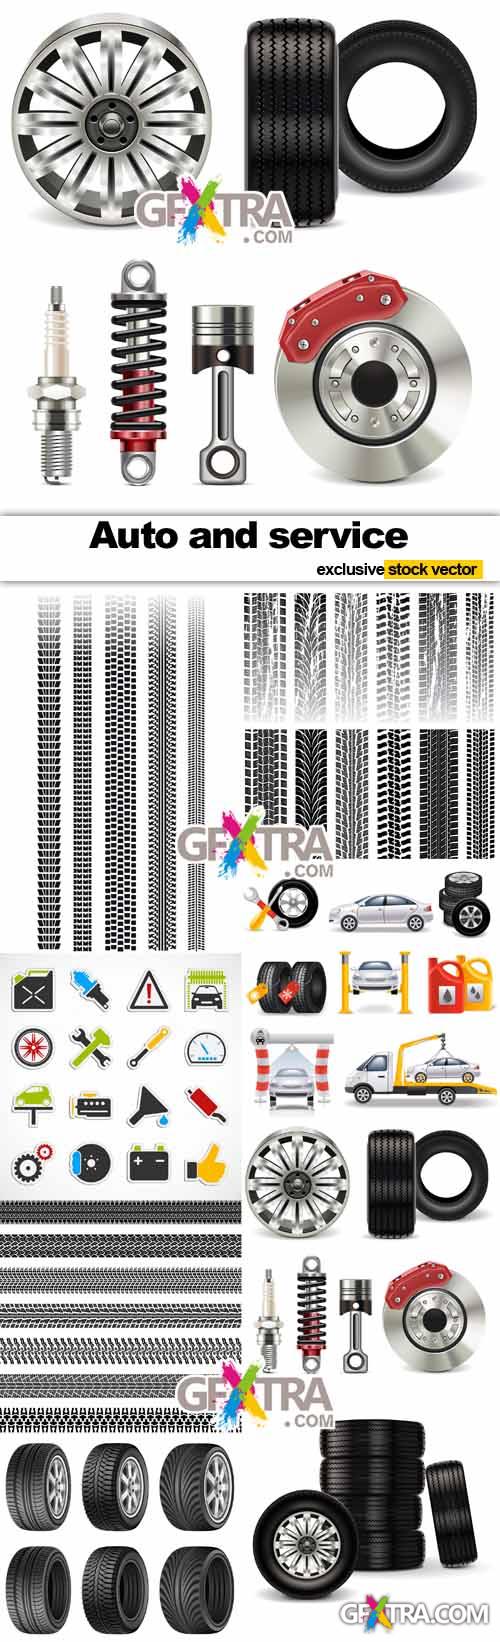 Auto and Service - Vector Stock